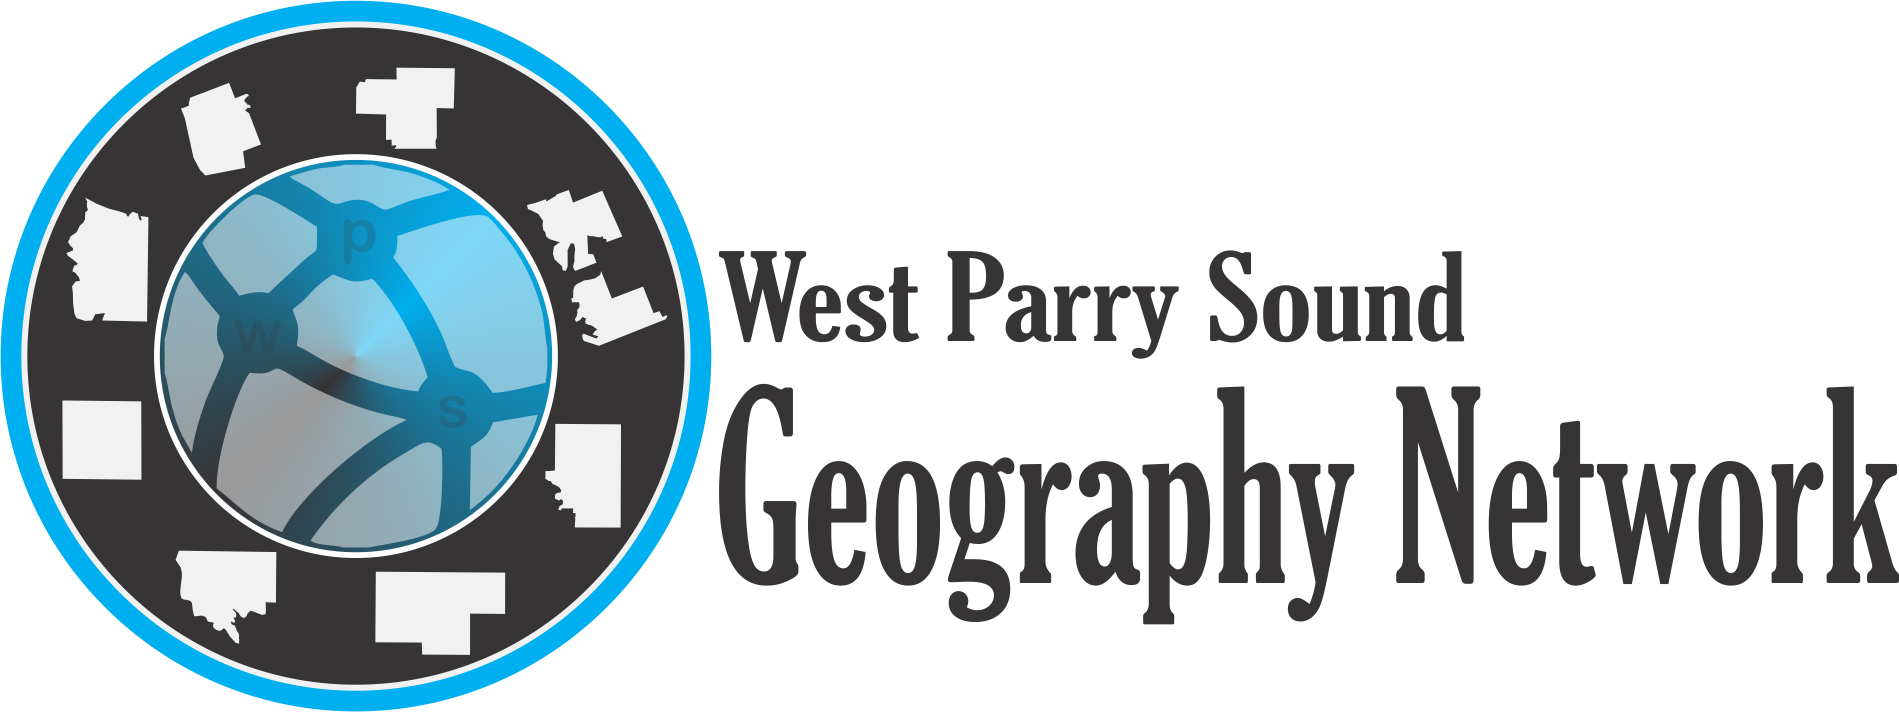 West Parry Sound Geography Network logo